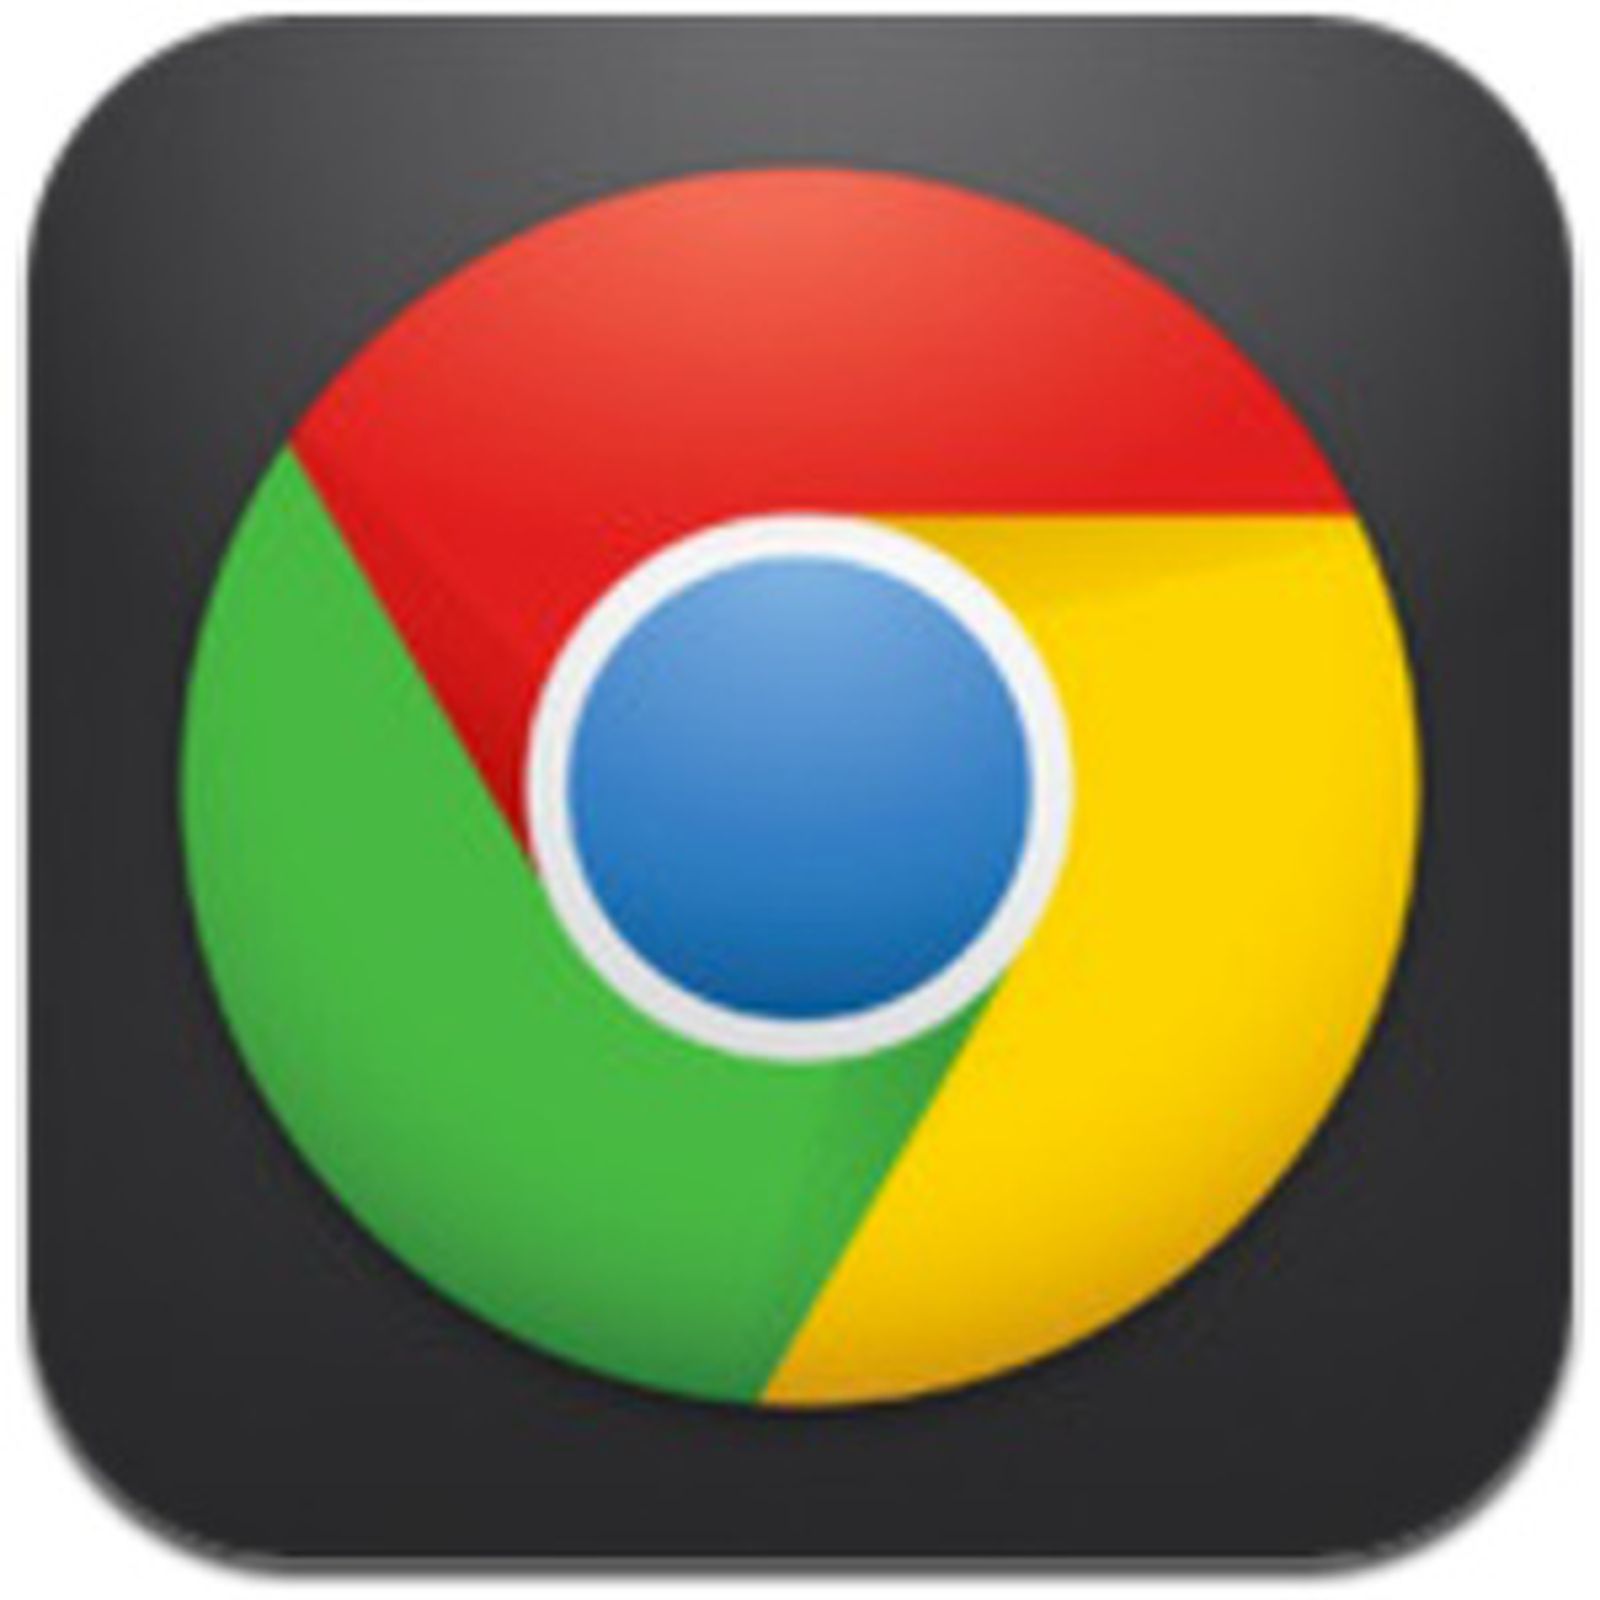 Chrome's Share of iOS Usage Doubles YearOverYear to 3